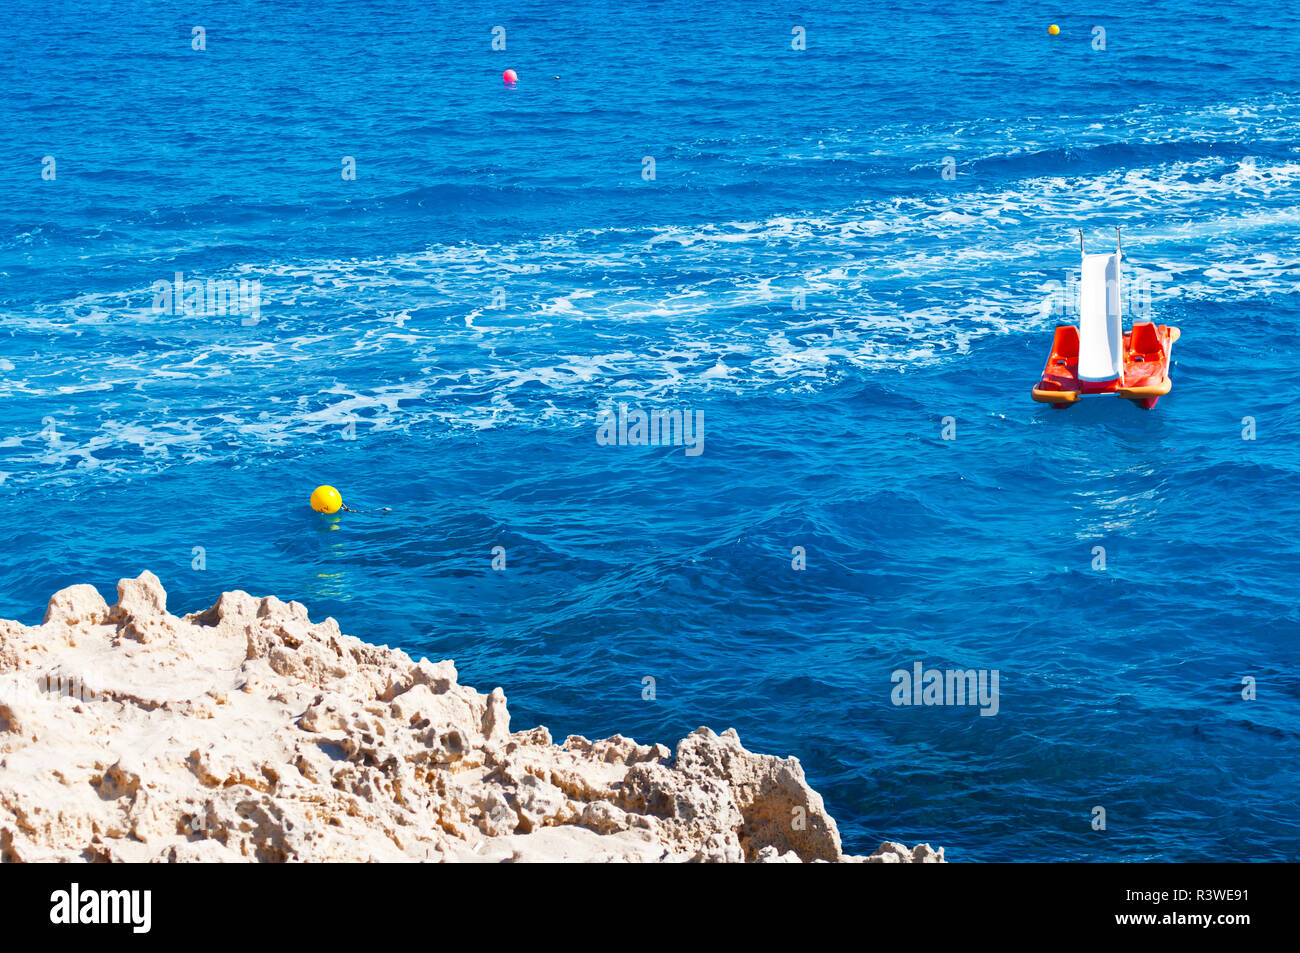 Image of calm sea surface. Closeup of one orange paddleboat in deep blue water against foamy trace on the background. Warm day in fall. Concept of lei Stock Photo